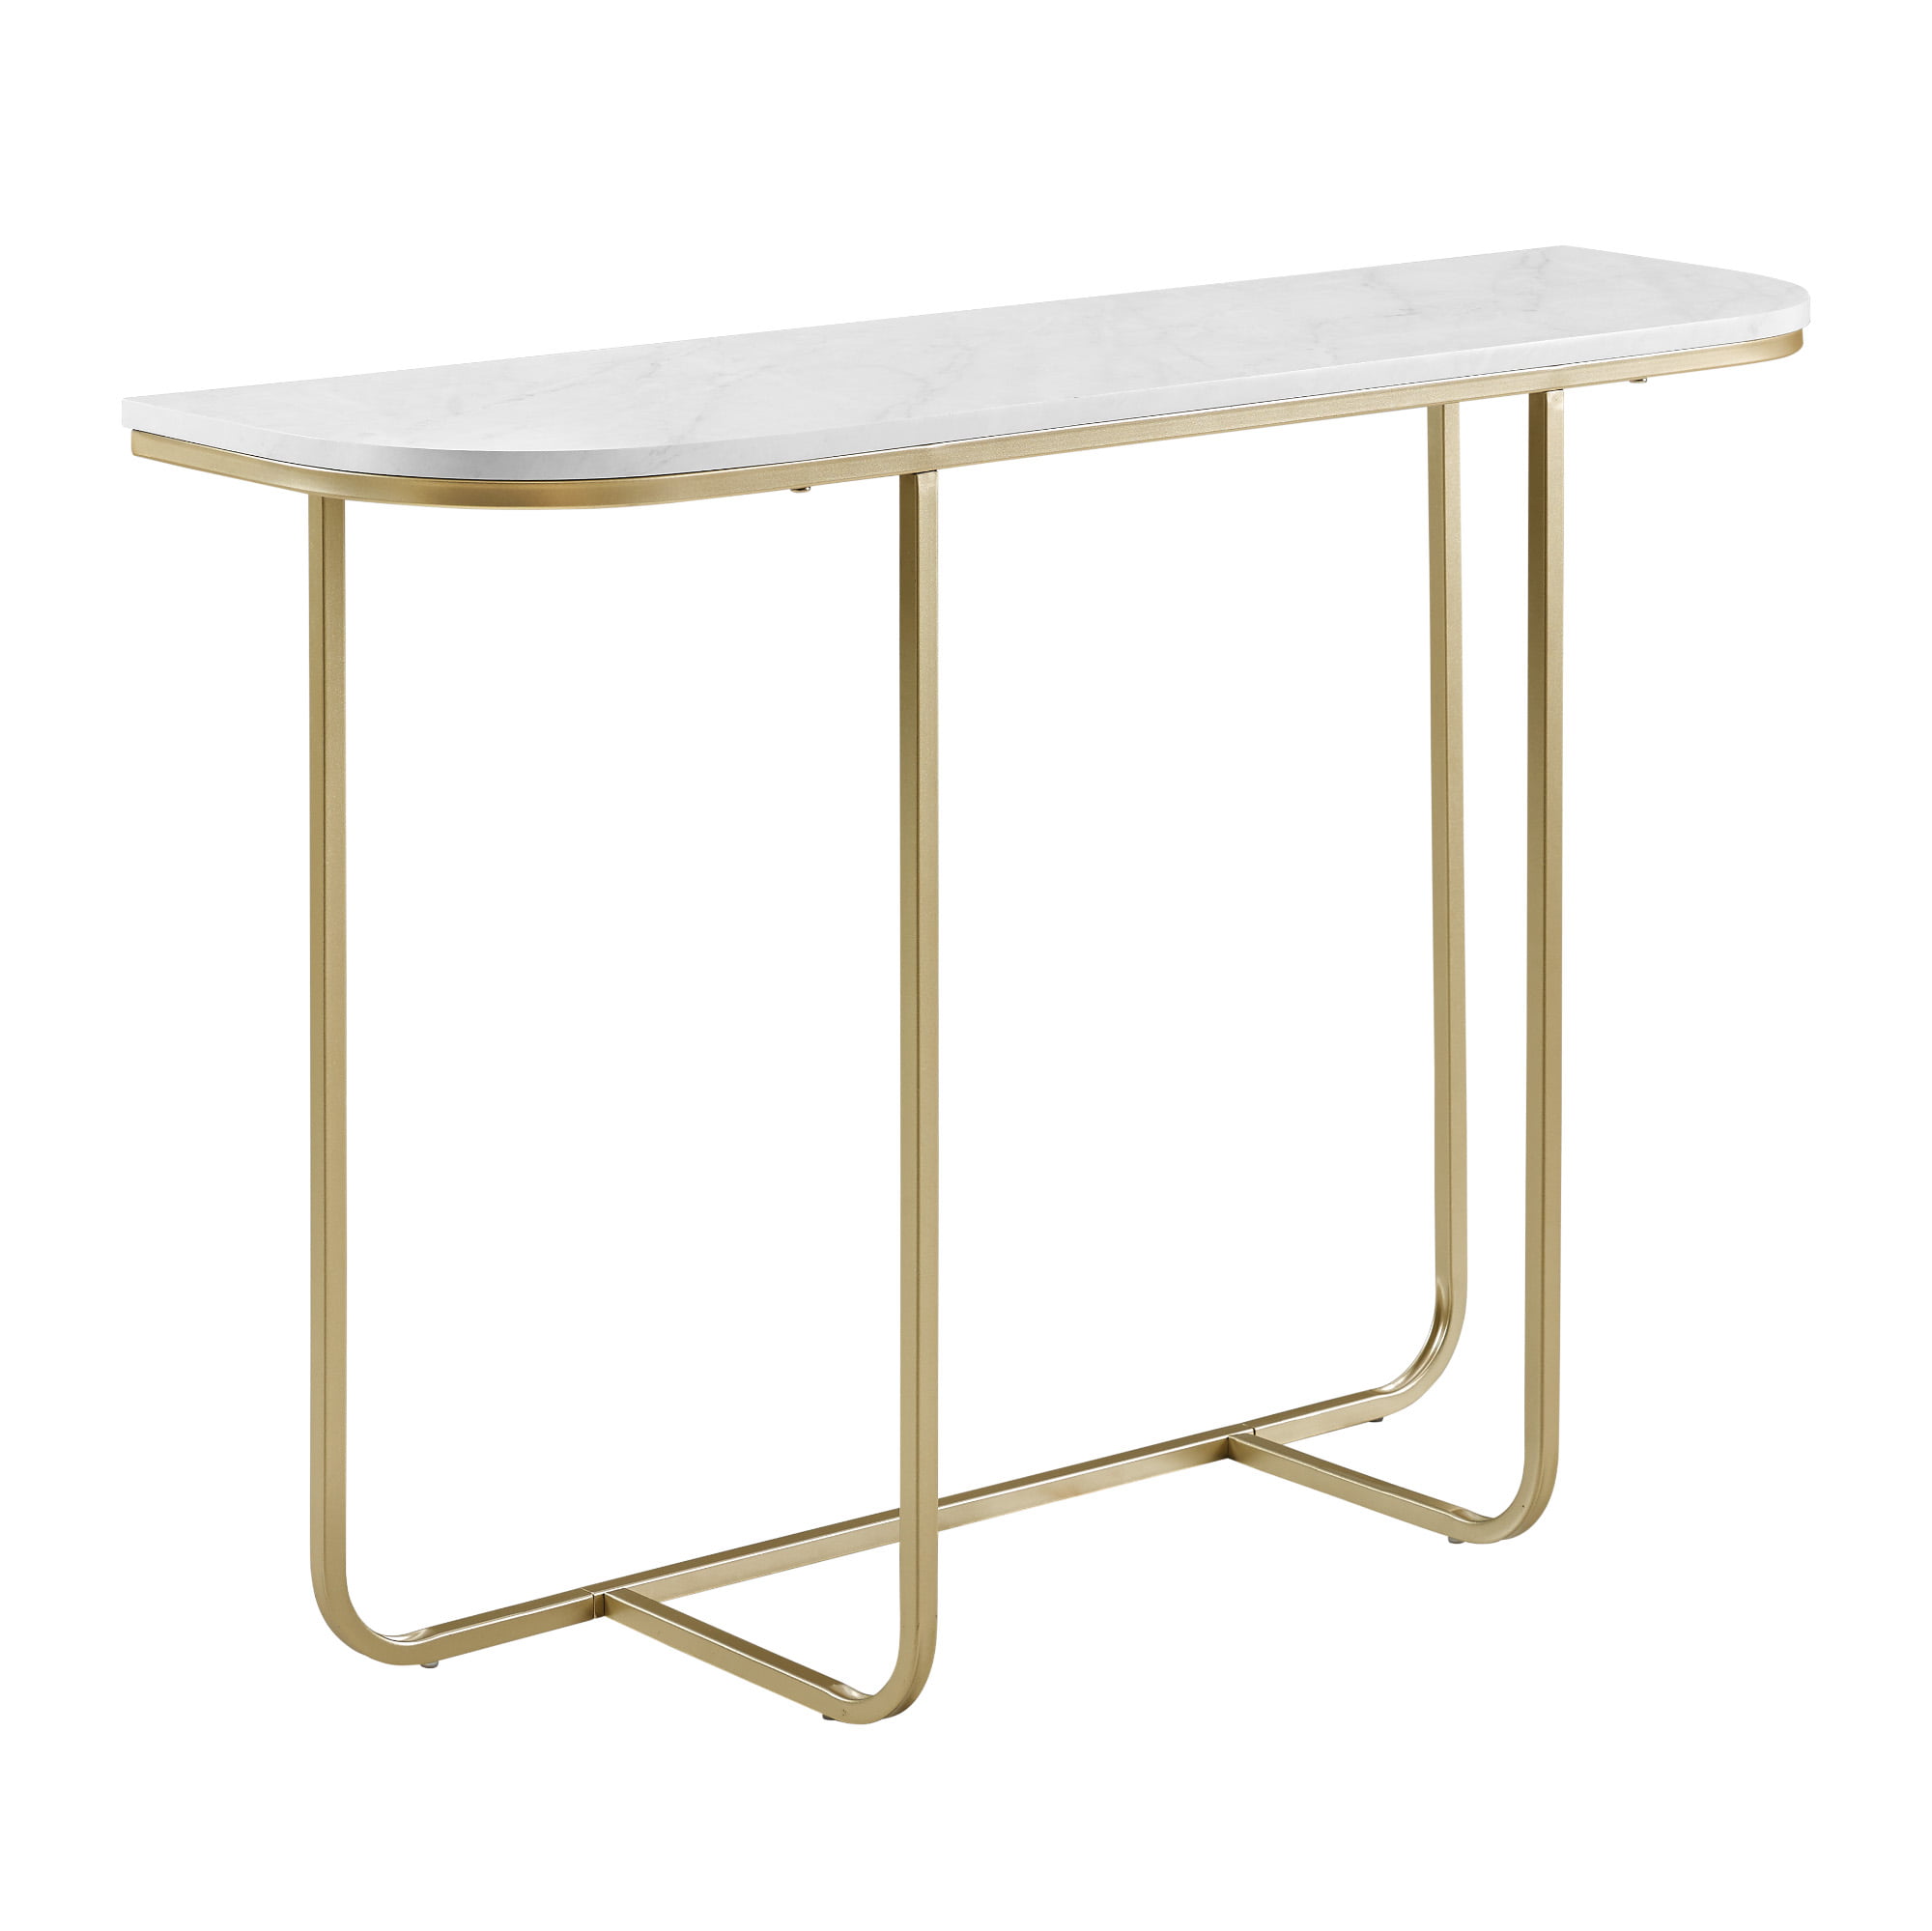 44" Modern Curved Entry Table White Faux Marble/Gold 